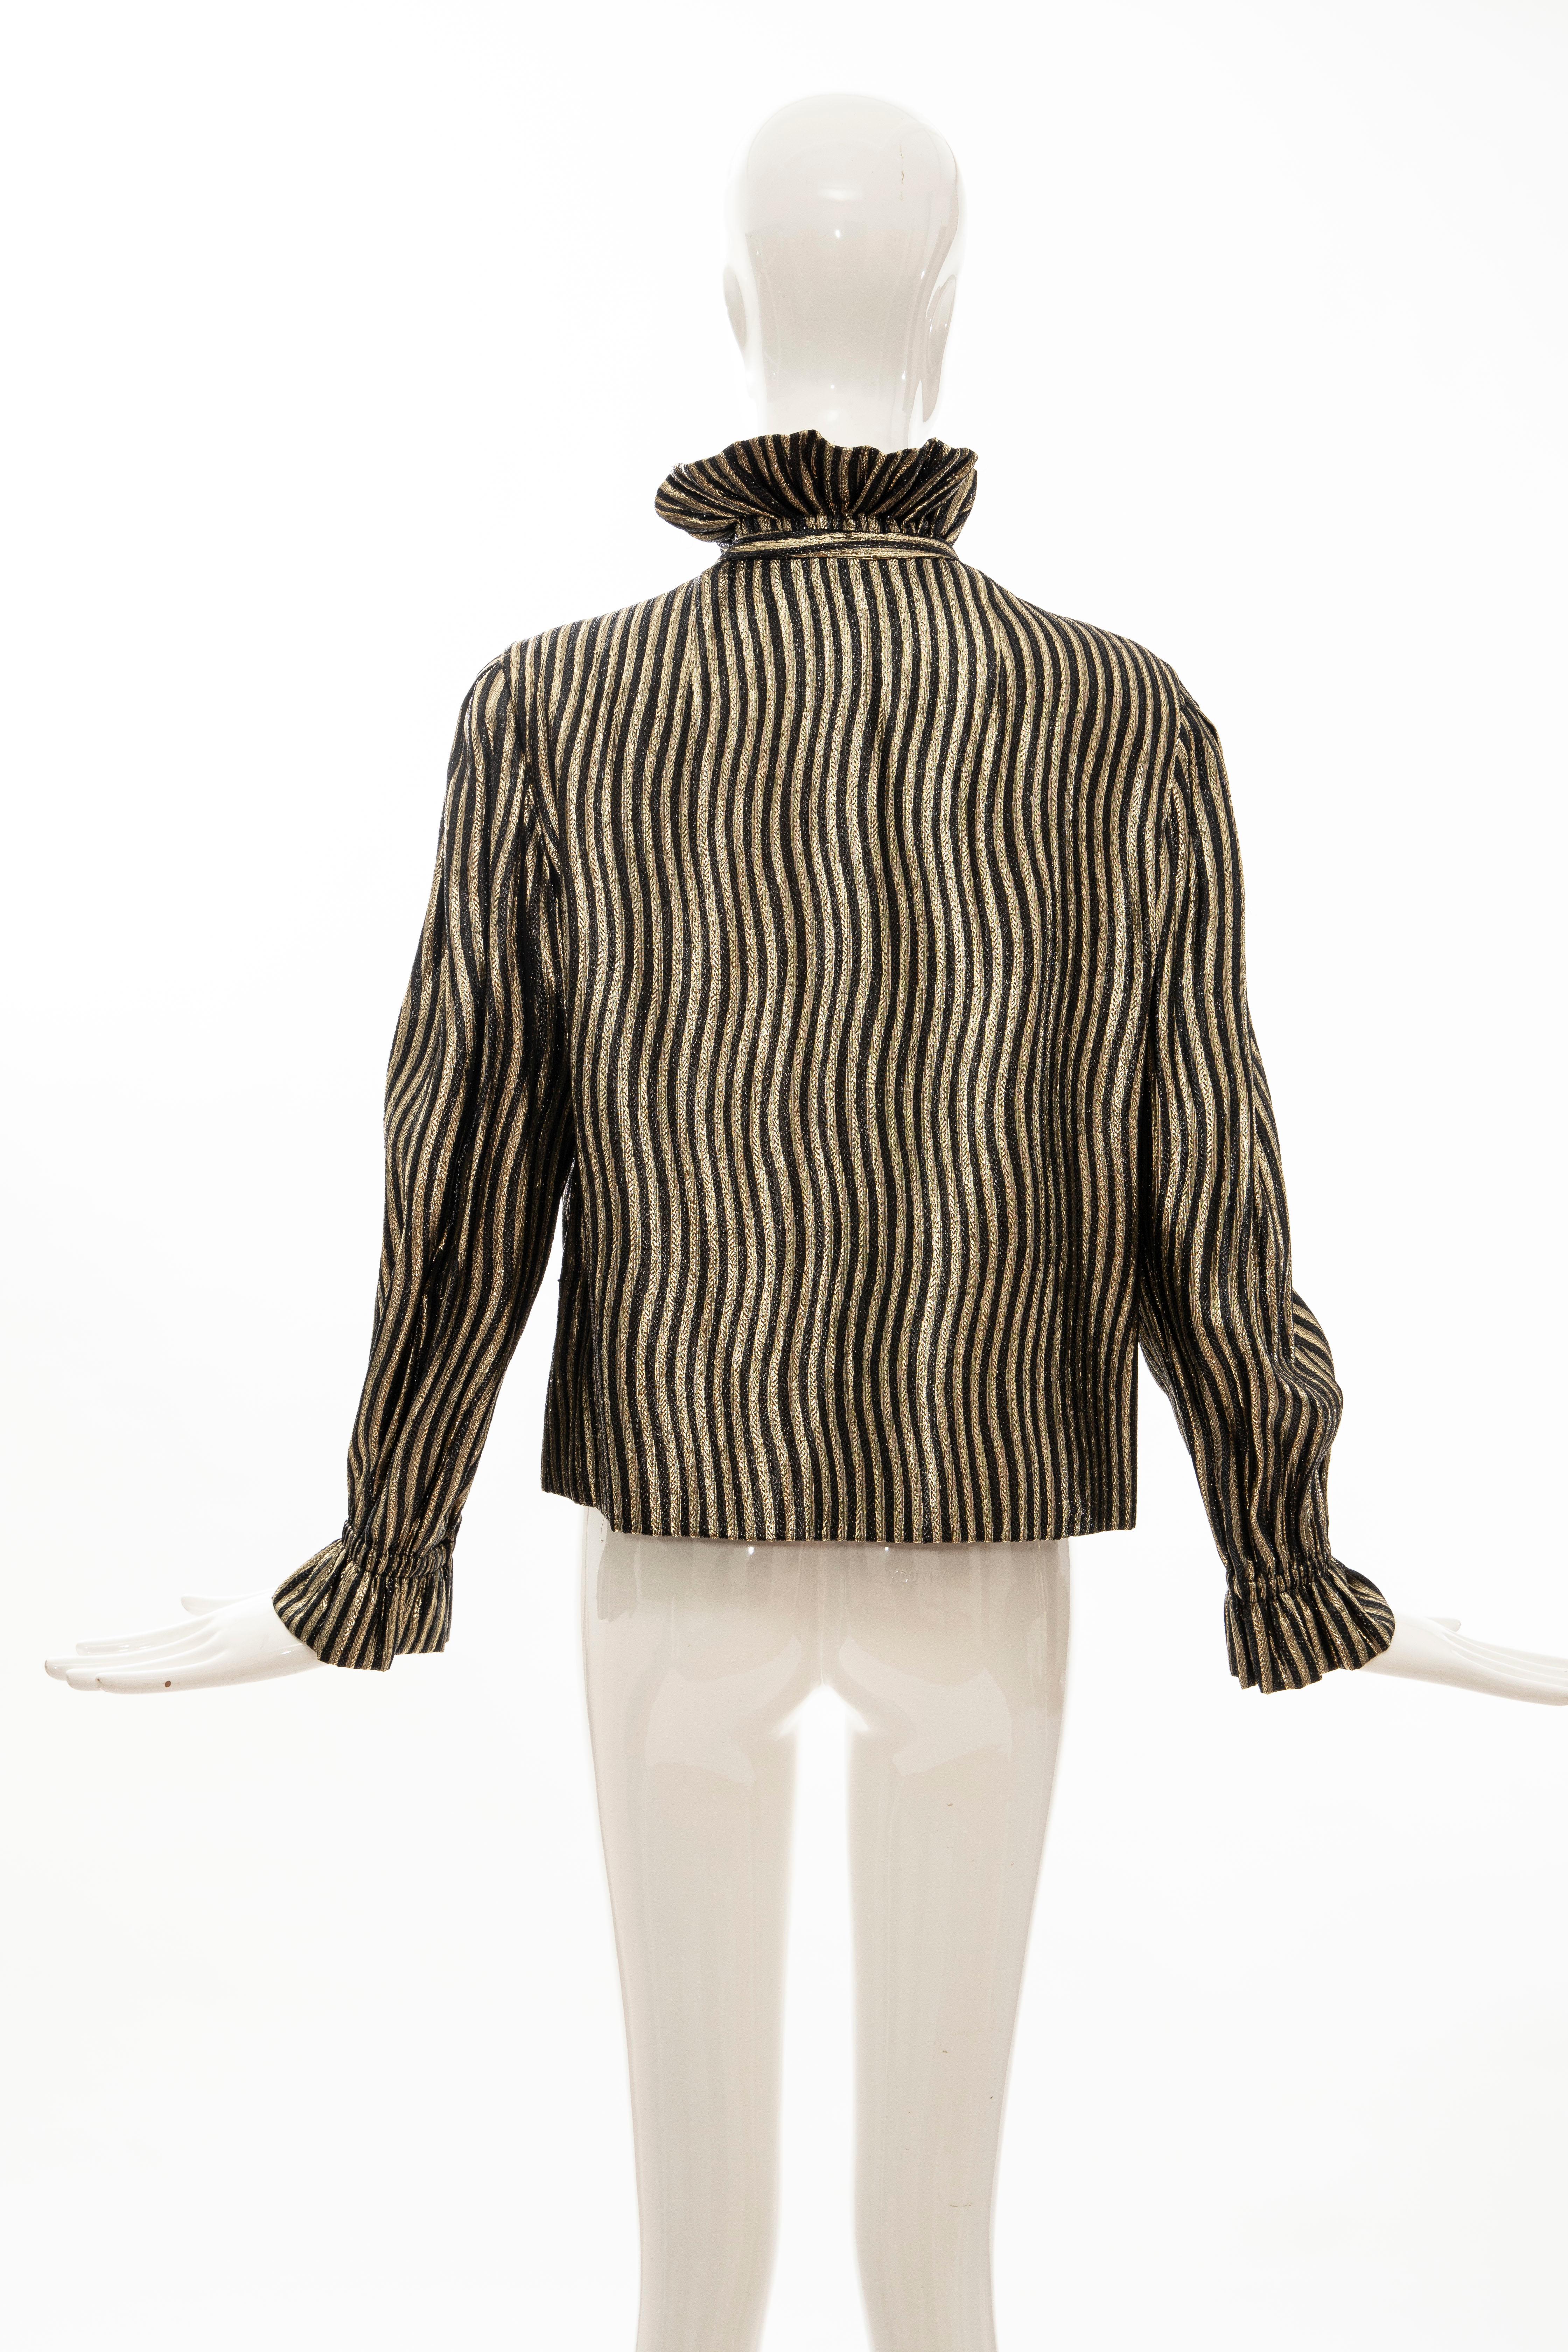 Pauline Trigere Black Gold Striped Metallic Snap Front Blouse, Circa: 1970's For Sale 5